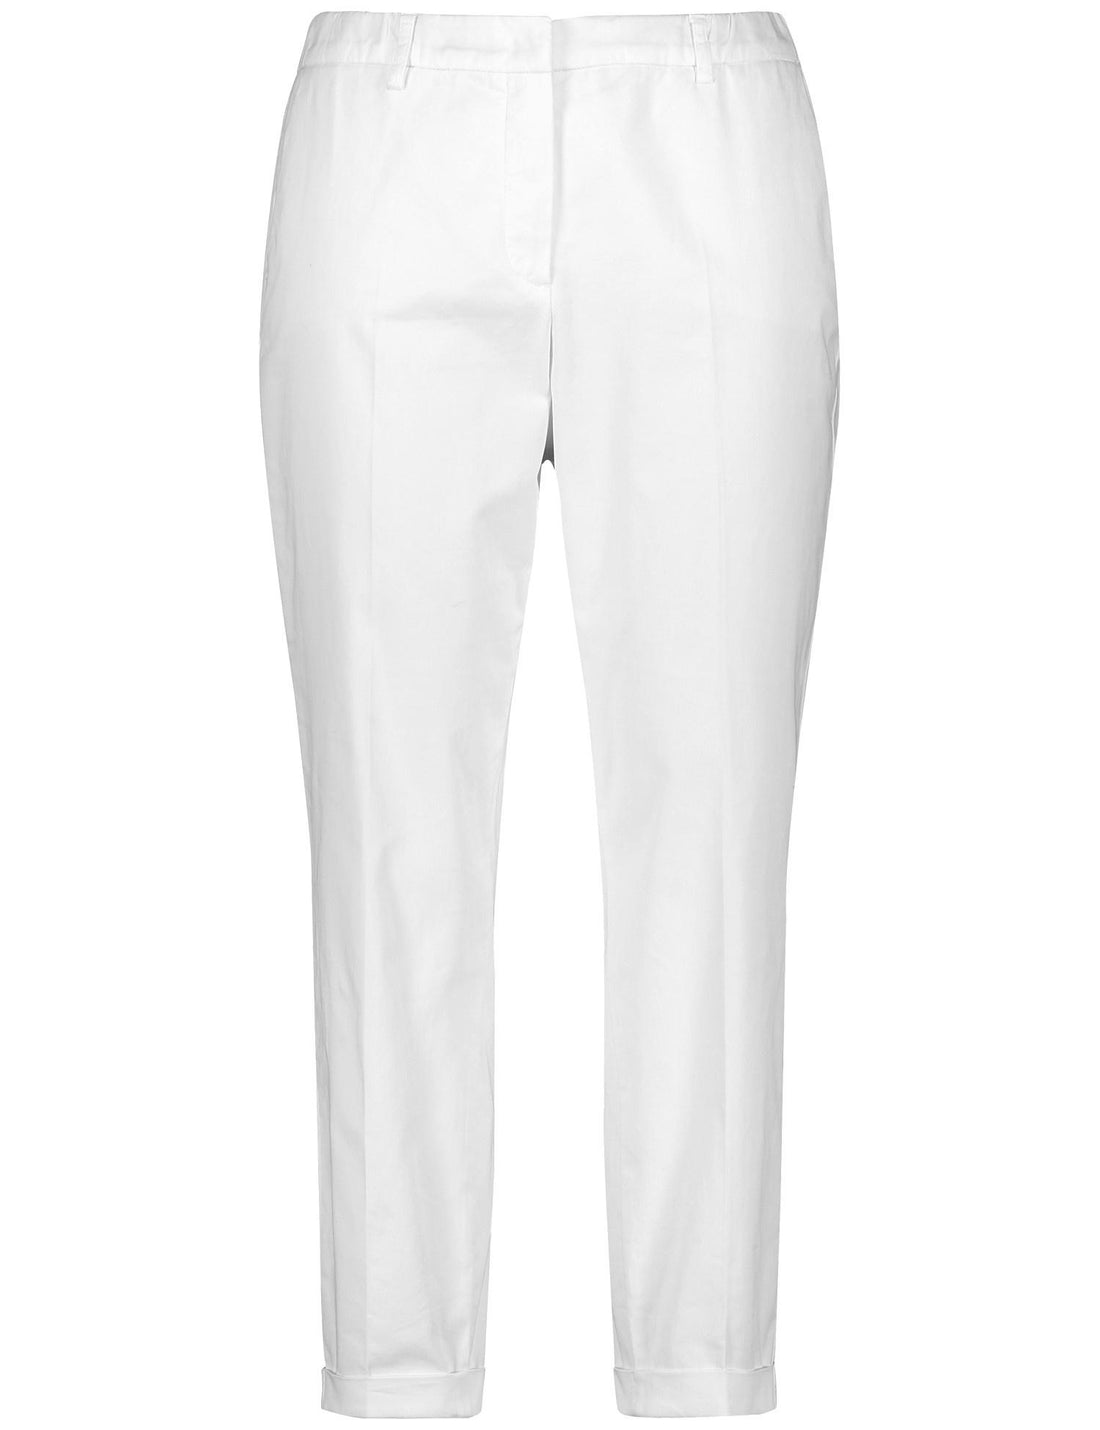 Greta Cotton Chinos That Stretch For Comfort_420017-21408_9600_02